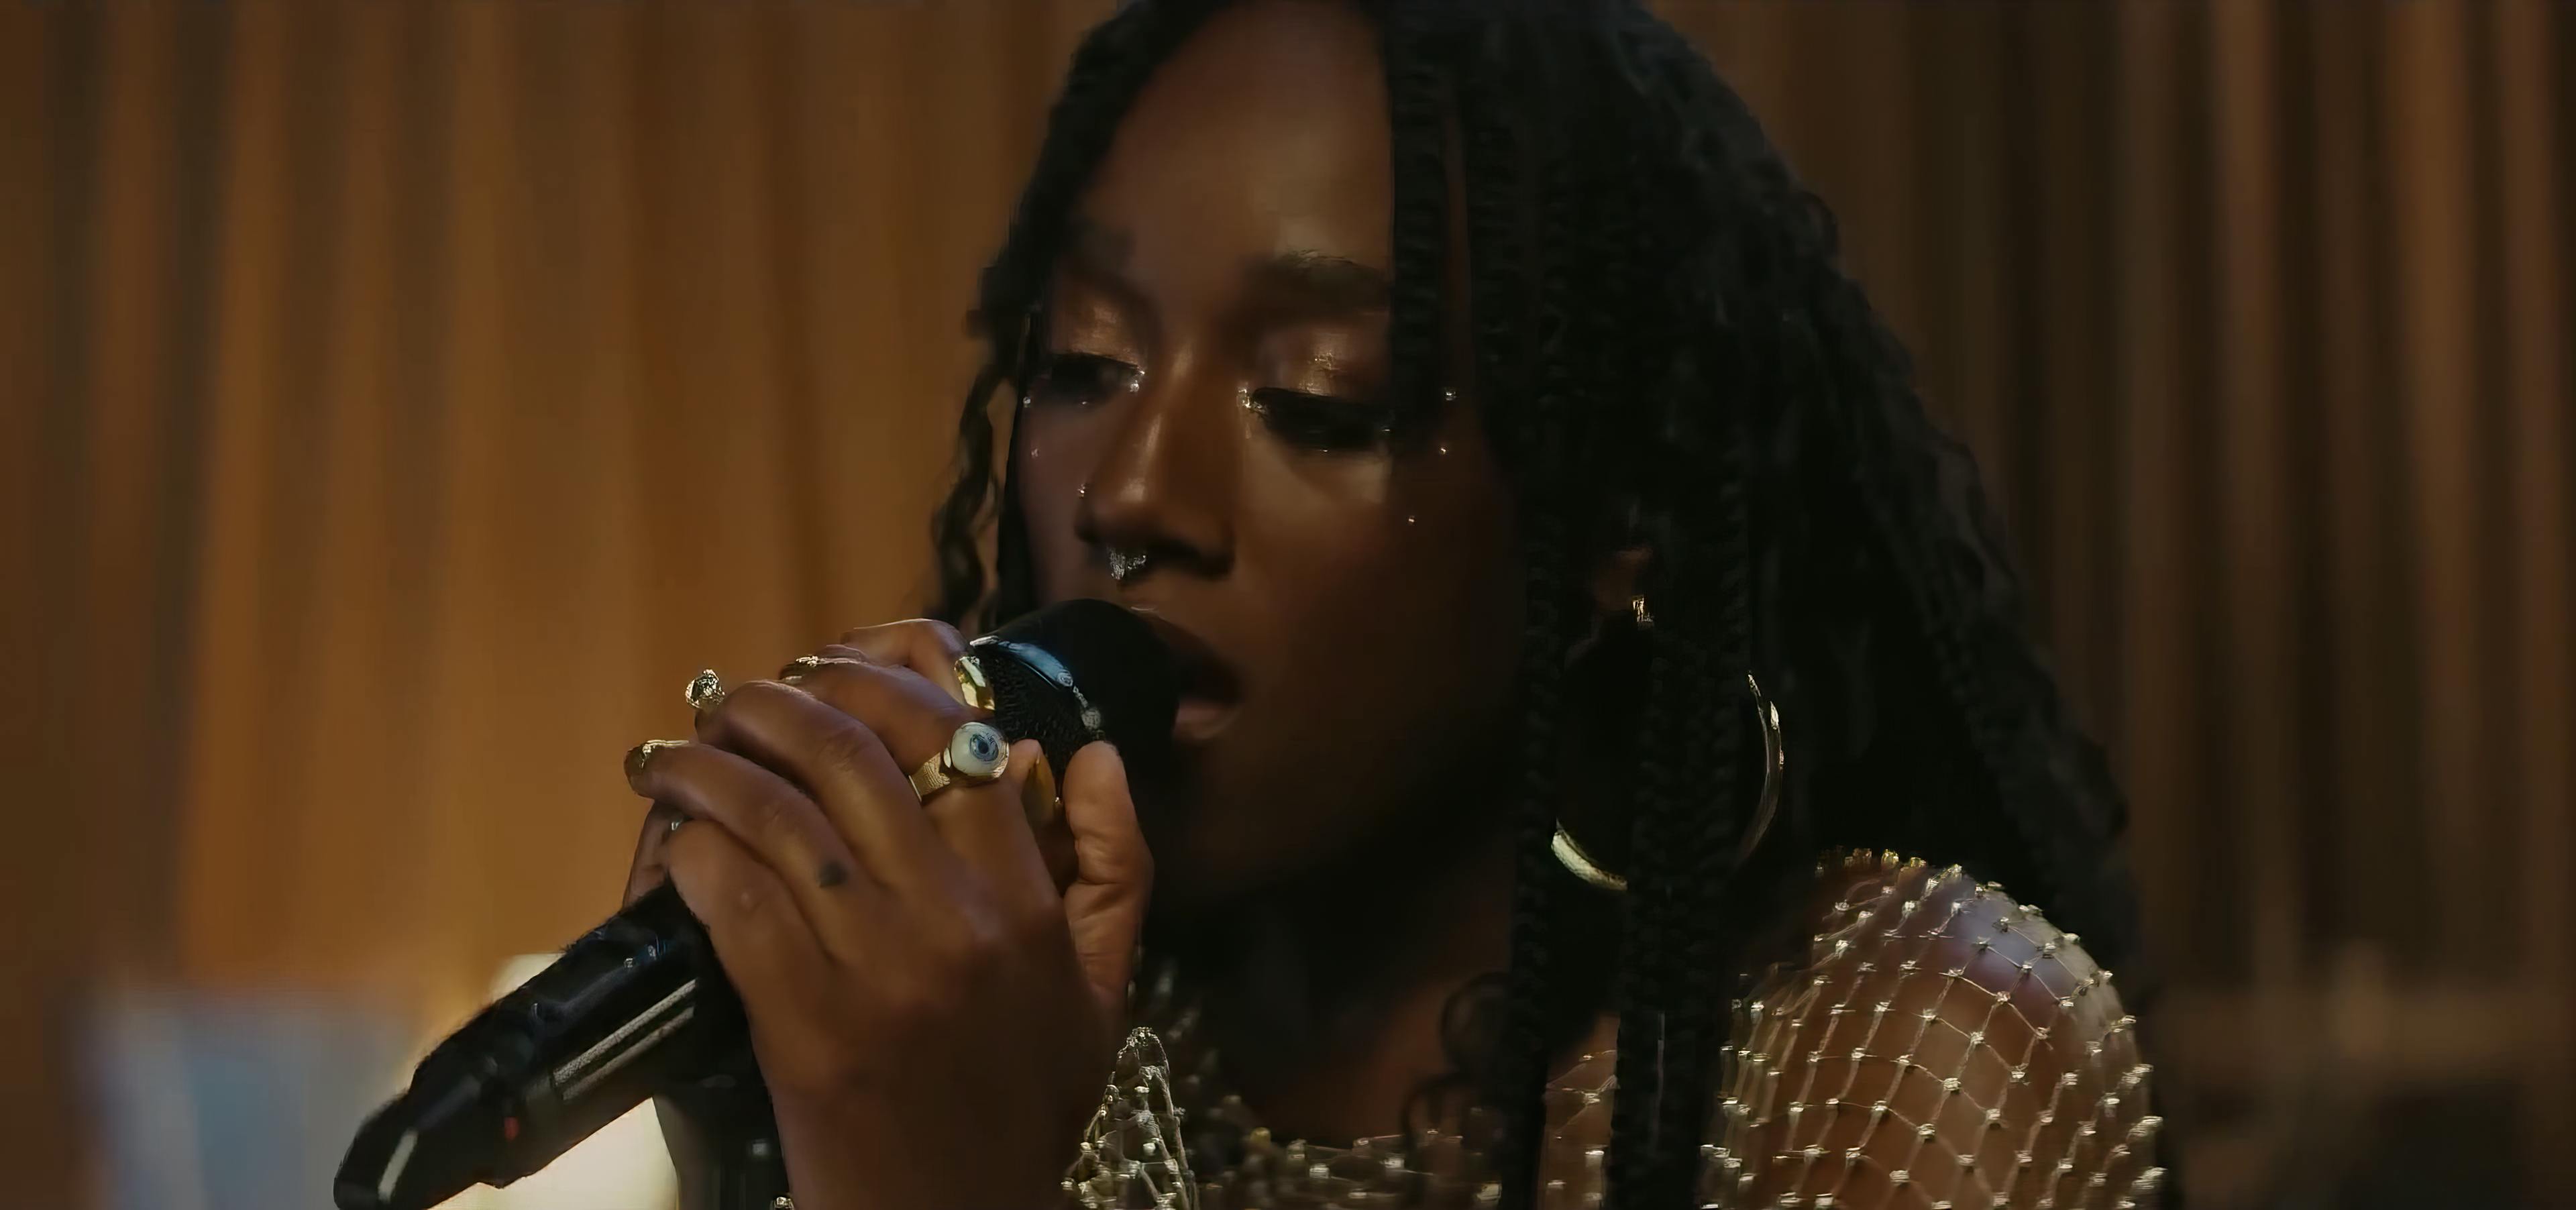 A close-up of Aryèe The Gem performing in a live session for the song 'Mirror.' She is holding a microphone close to her lips, eyes closed, conveying deep emotion. Her hair is styled in long braids, and she's adorned with shimmering eye makeup and sparkling earrings. The warm, ambient lighting and soft background lend a soulful atmosphere to the scene, focusing attention on her expressive performance.